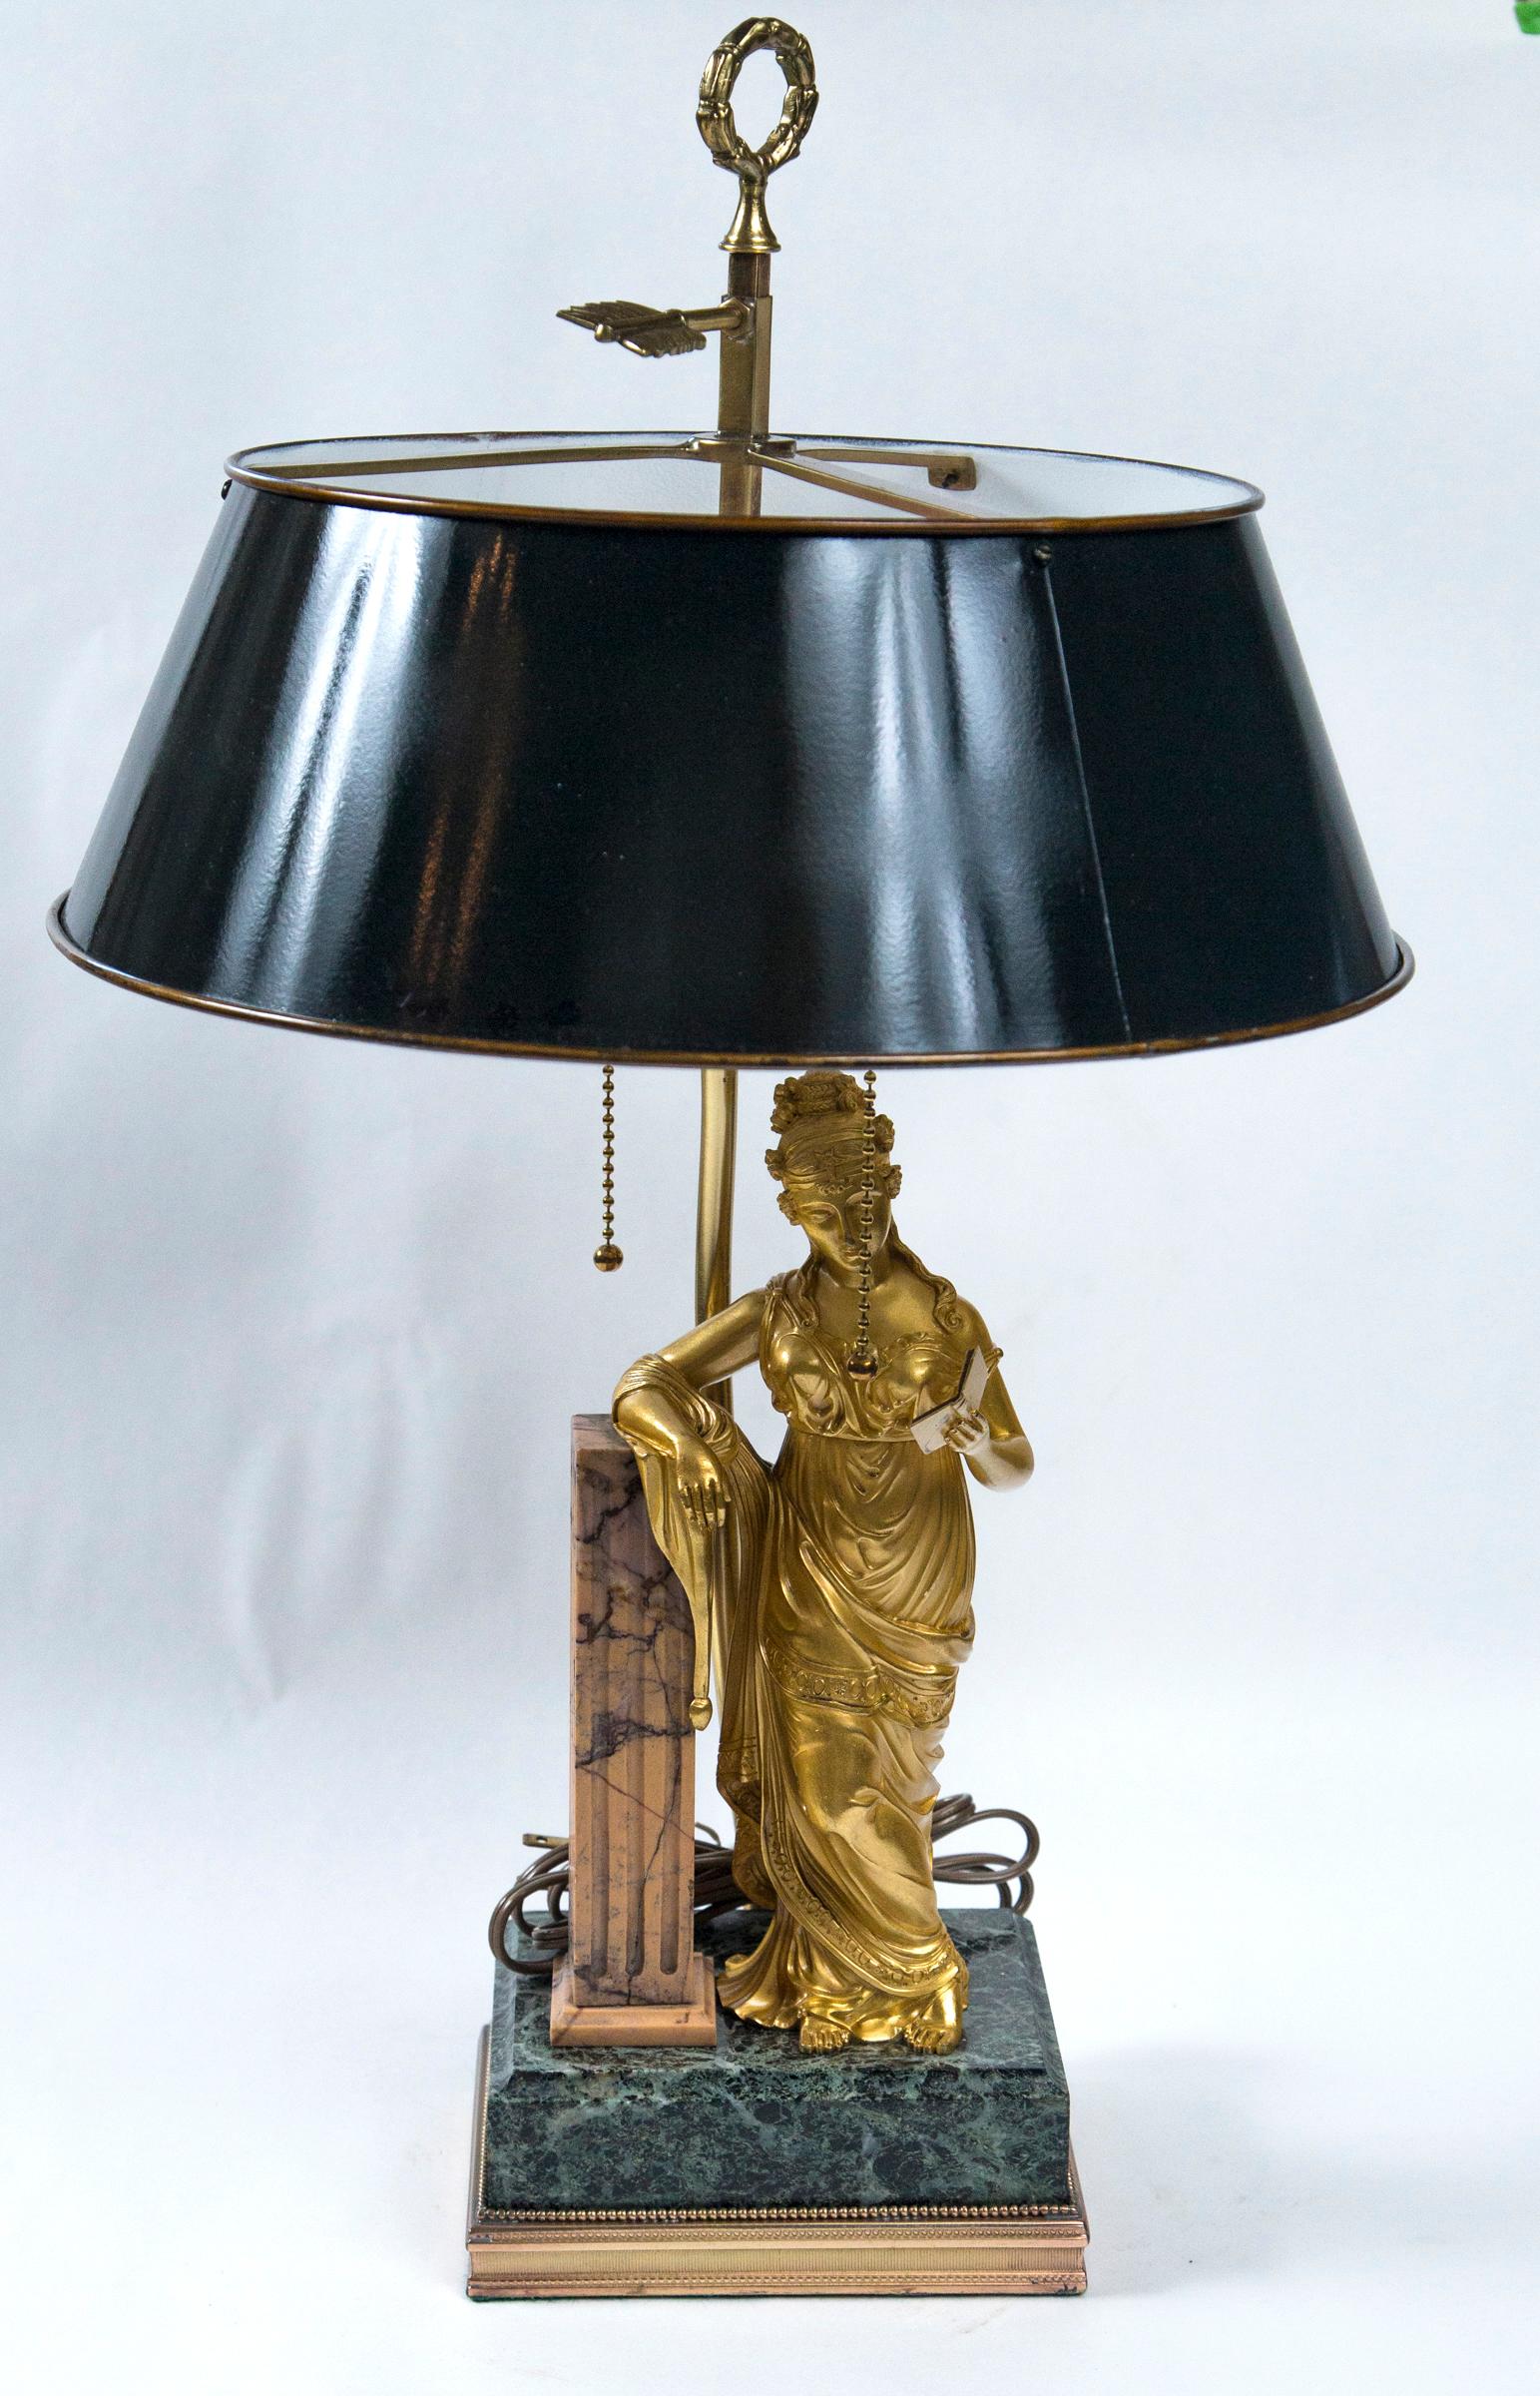 Gilt edged green marble base. She holds an open book in her left hand while her right elbow rests atop a square fluted column. She wear a floor length gown of the late 18th century. Her hair atop her head in the style of the day. The figure itself